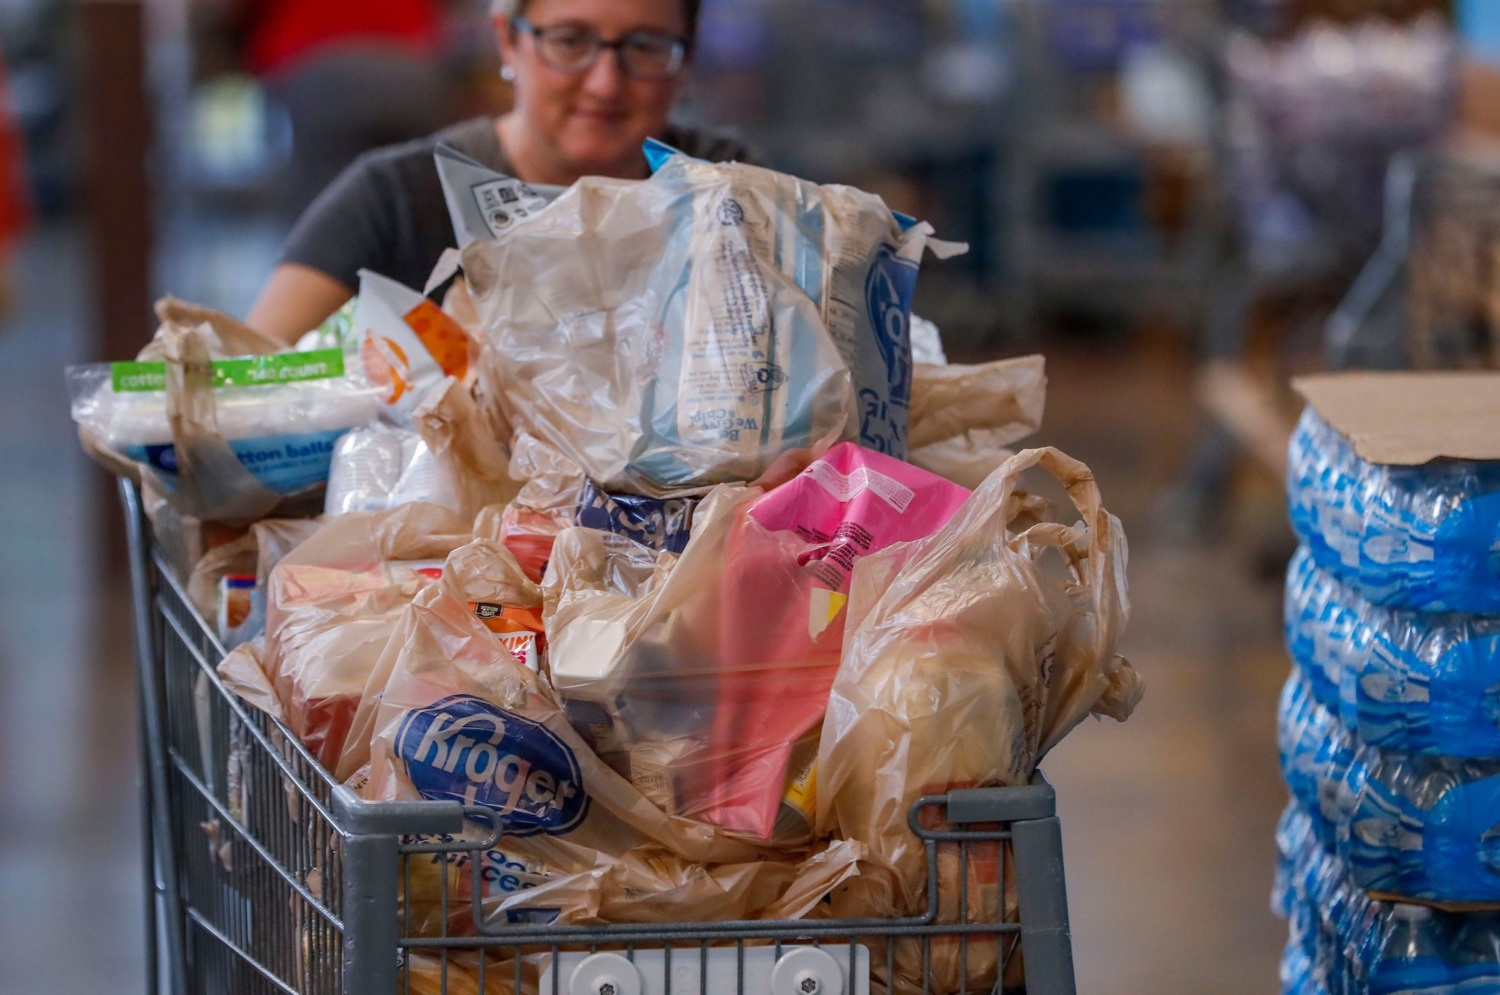 Governor Whitmer Lowers Cost of Groceries for Millions of Middle-Class Michigan Families